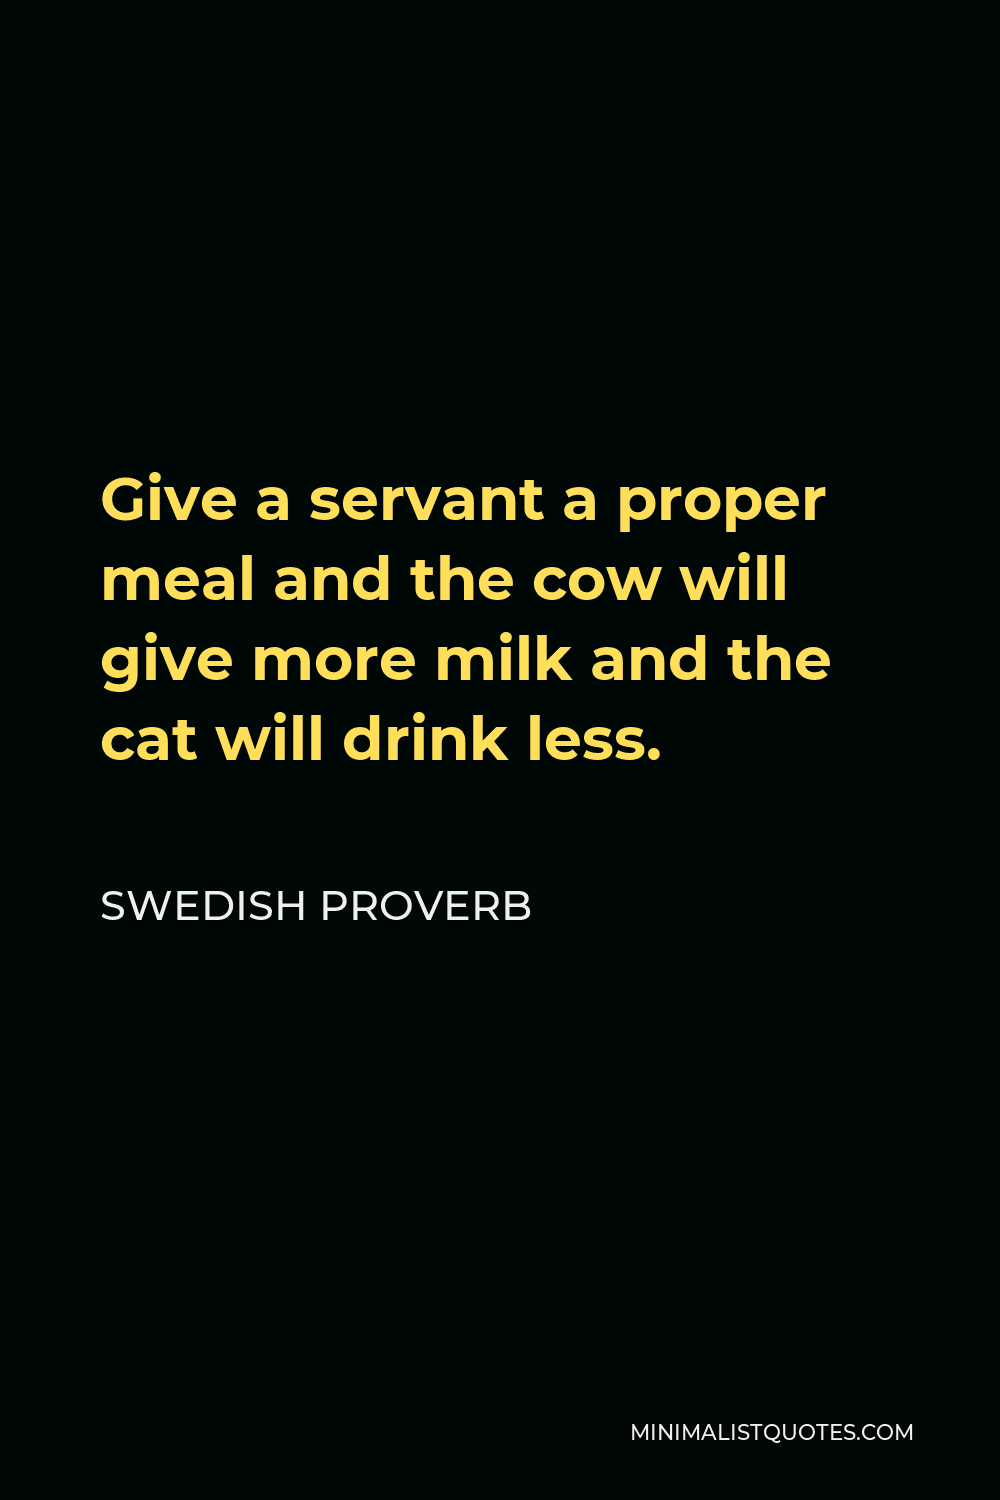 Swedish Proverb Quote - Give a servant a proper meal and the cow will give more milk and the cat will drink less.